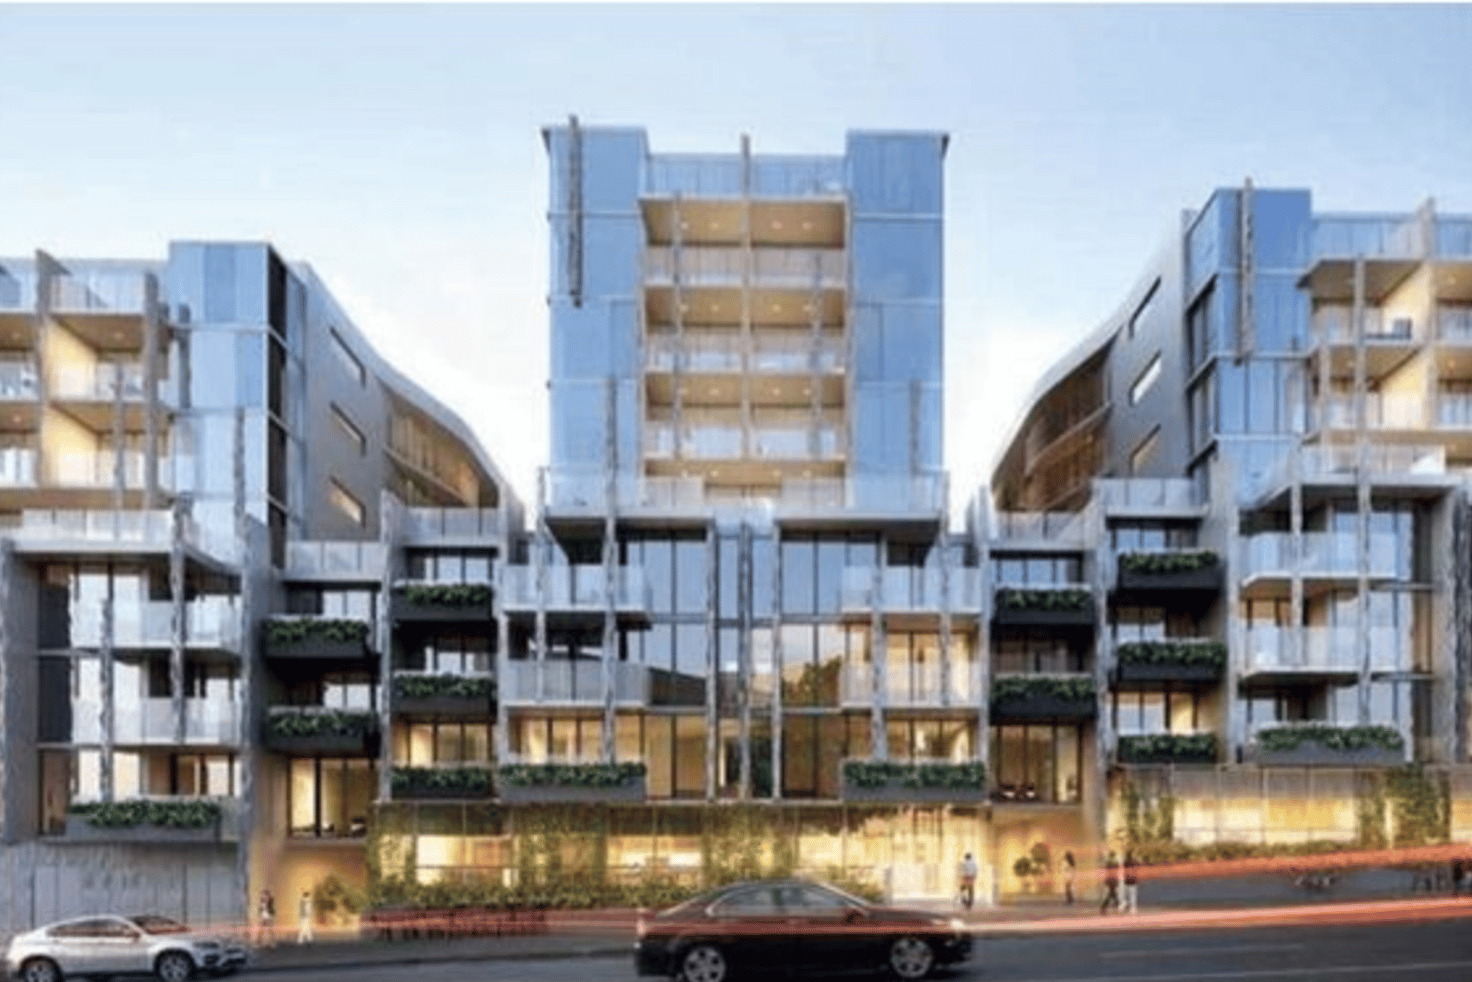 Main view of Homely apartment listing, 104/140 Dudley Street, West Melbourne VIC 3003